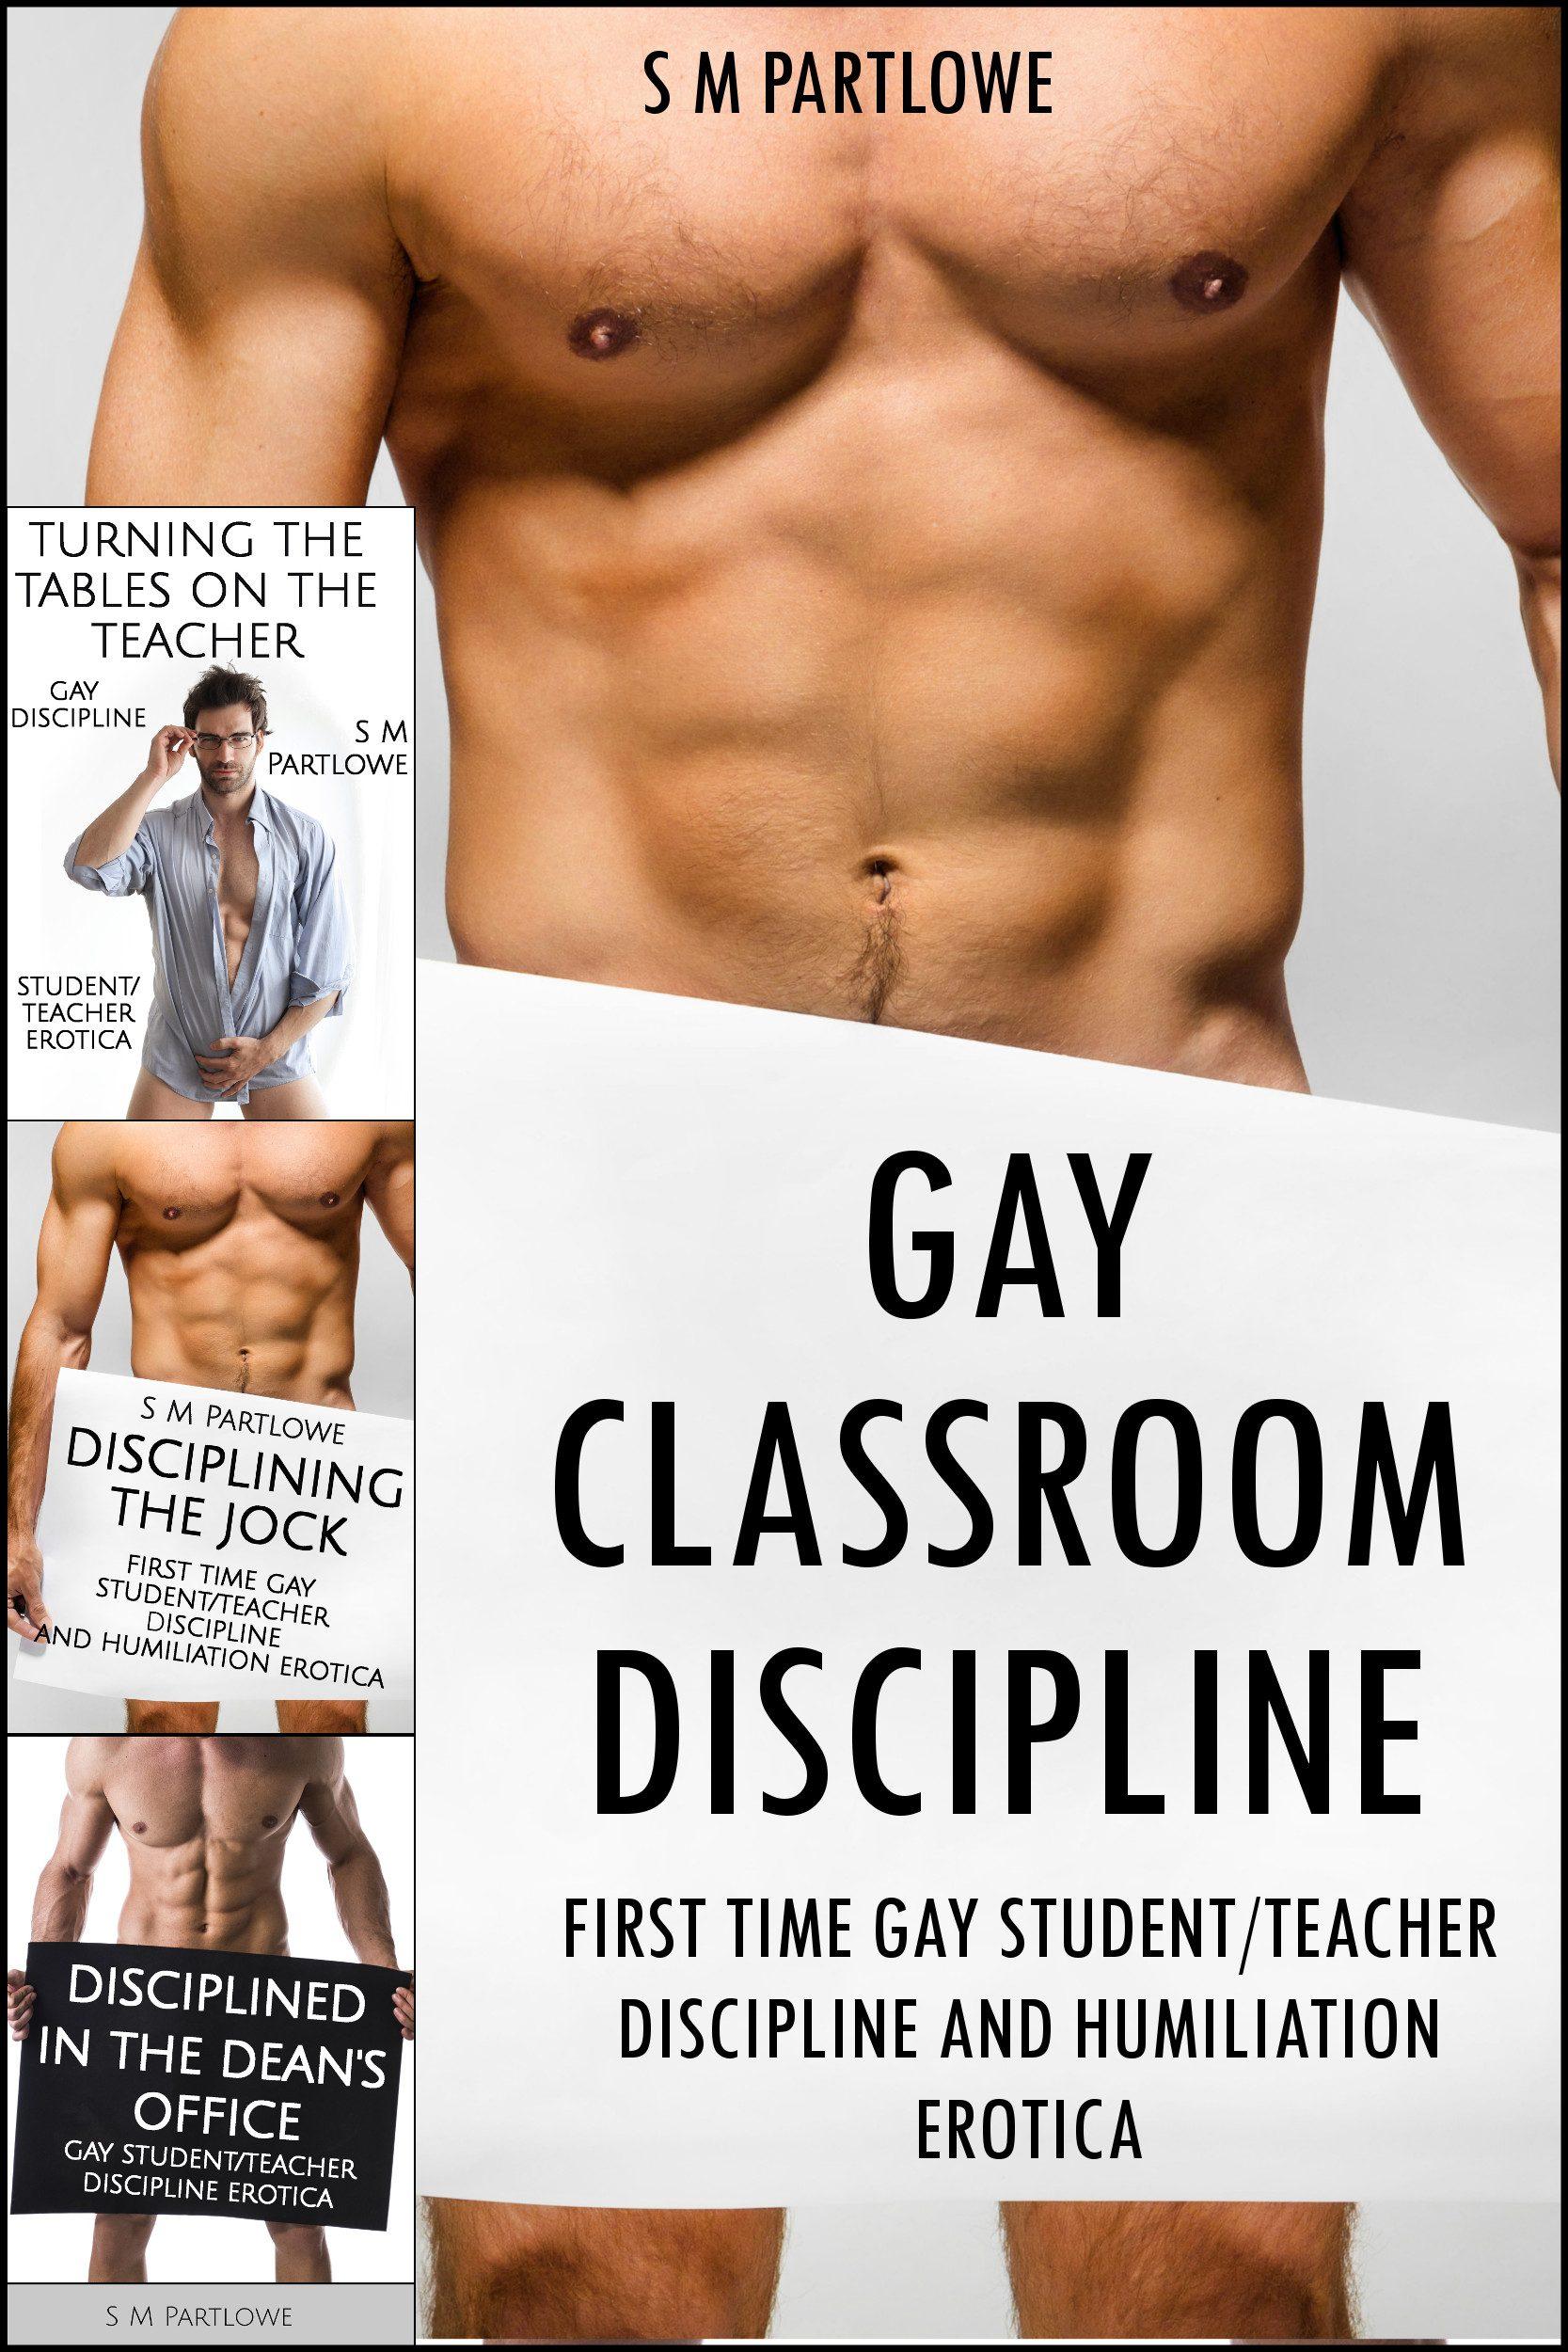 Gay bondage and discipline love connections